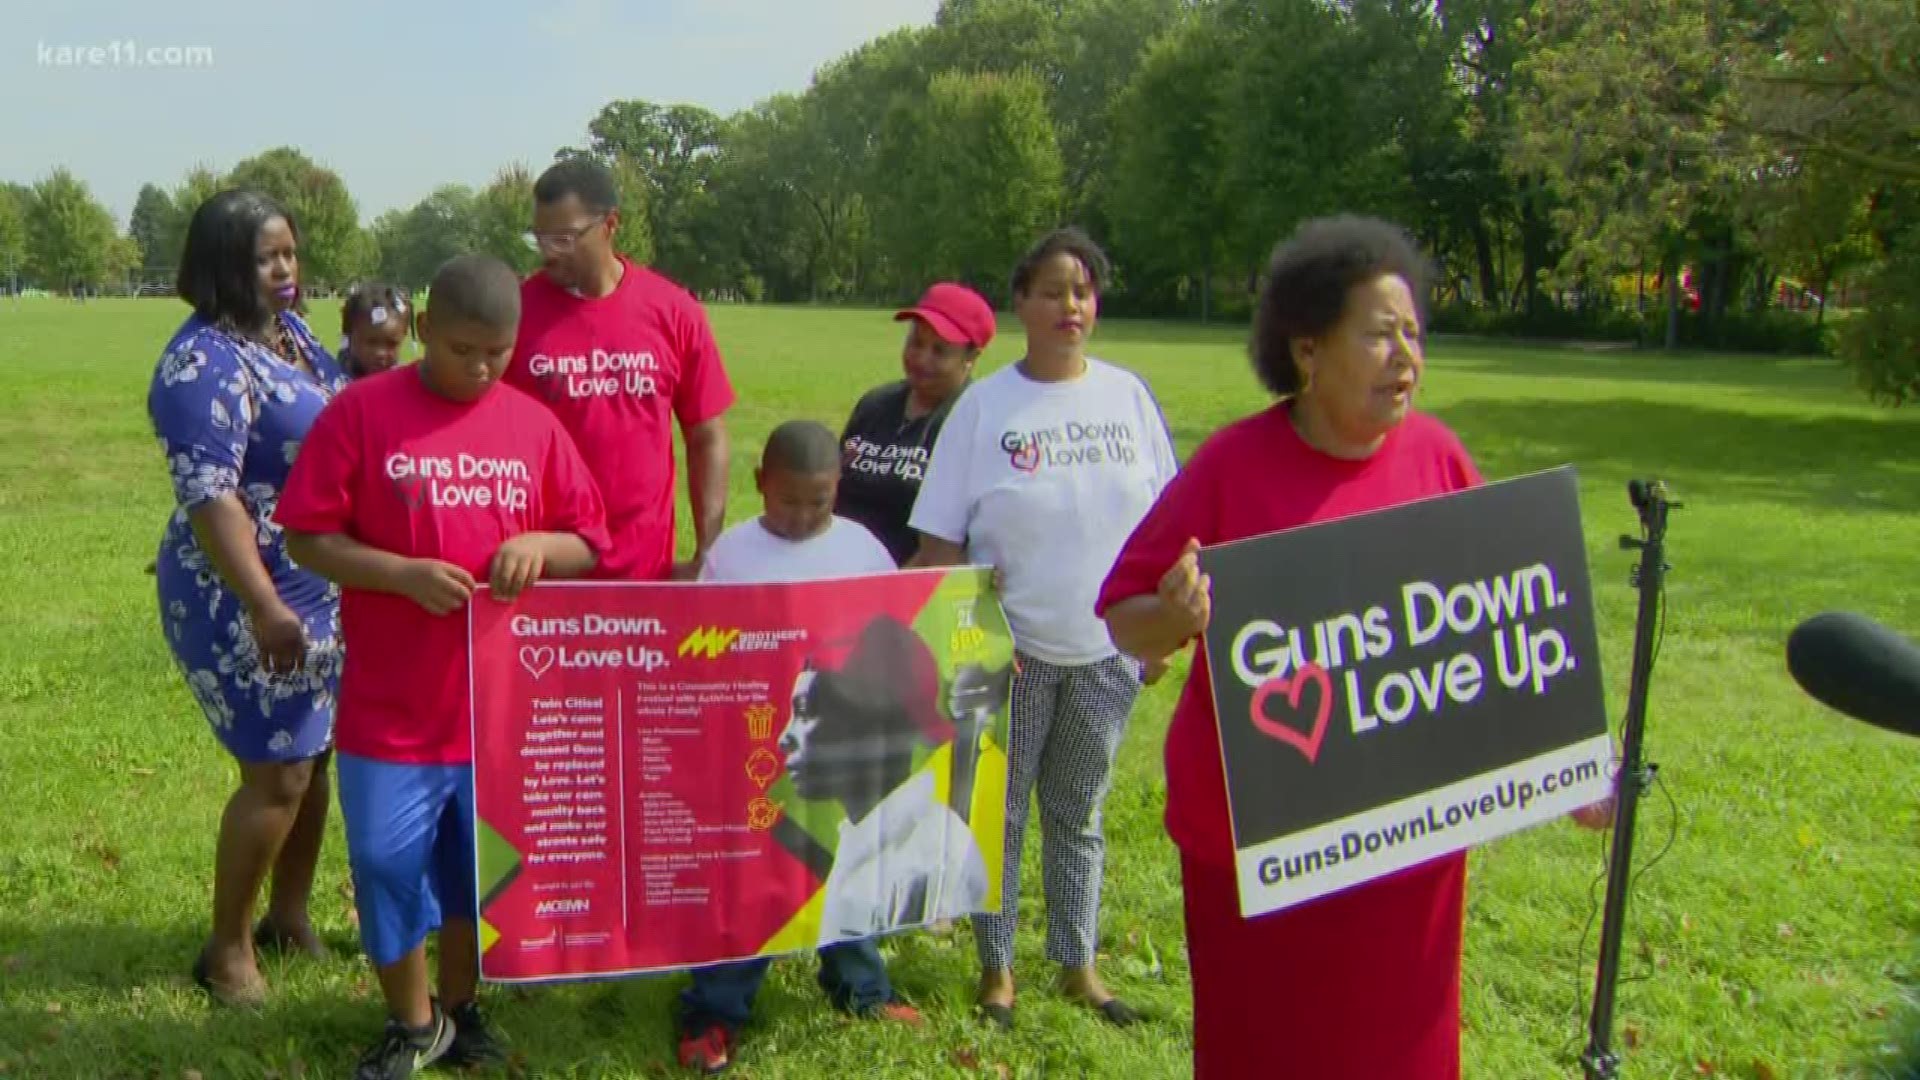 The "Guns Down, Love Up" Foundation was created to honor Tyrone Williams, a community activist who was shot and killed in Minneapolis last year.